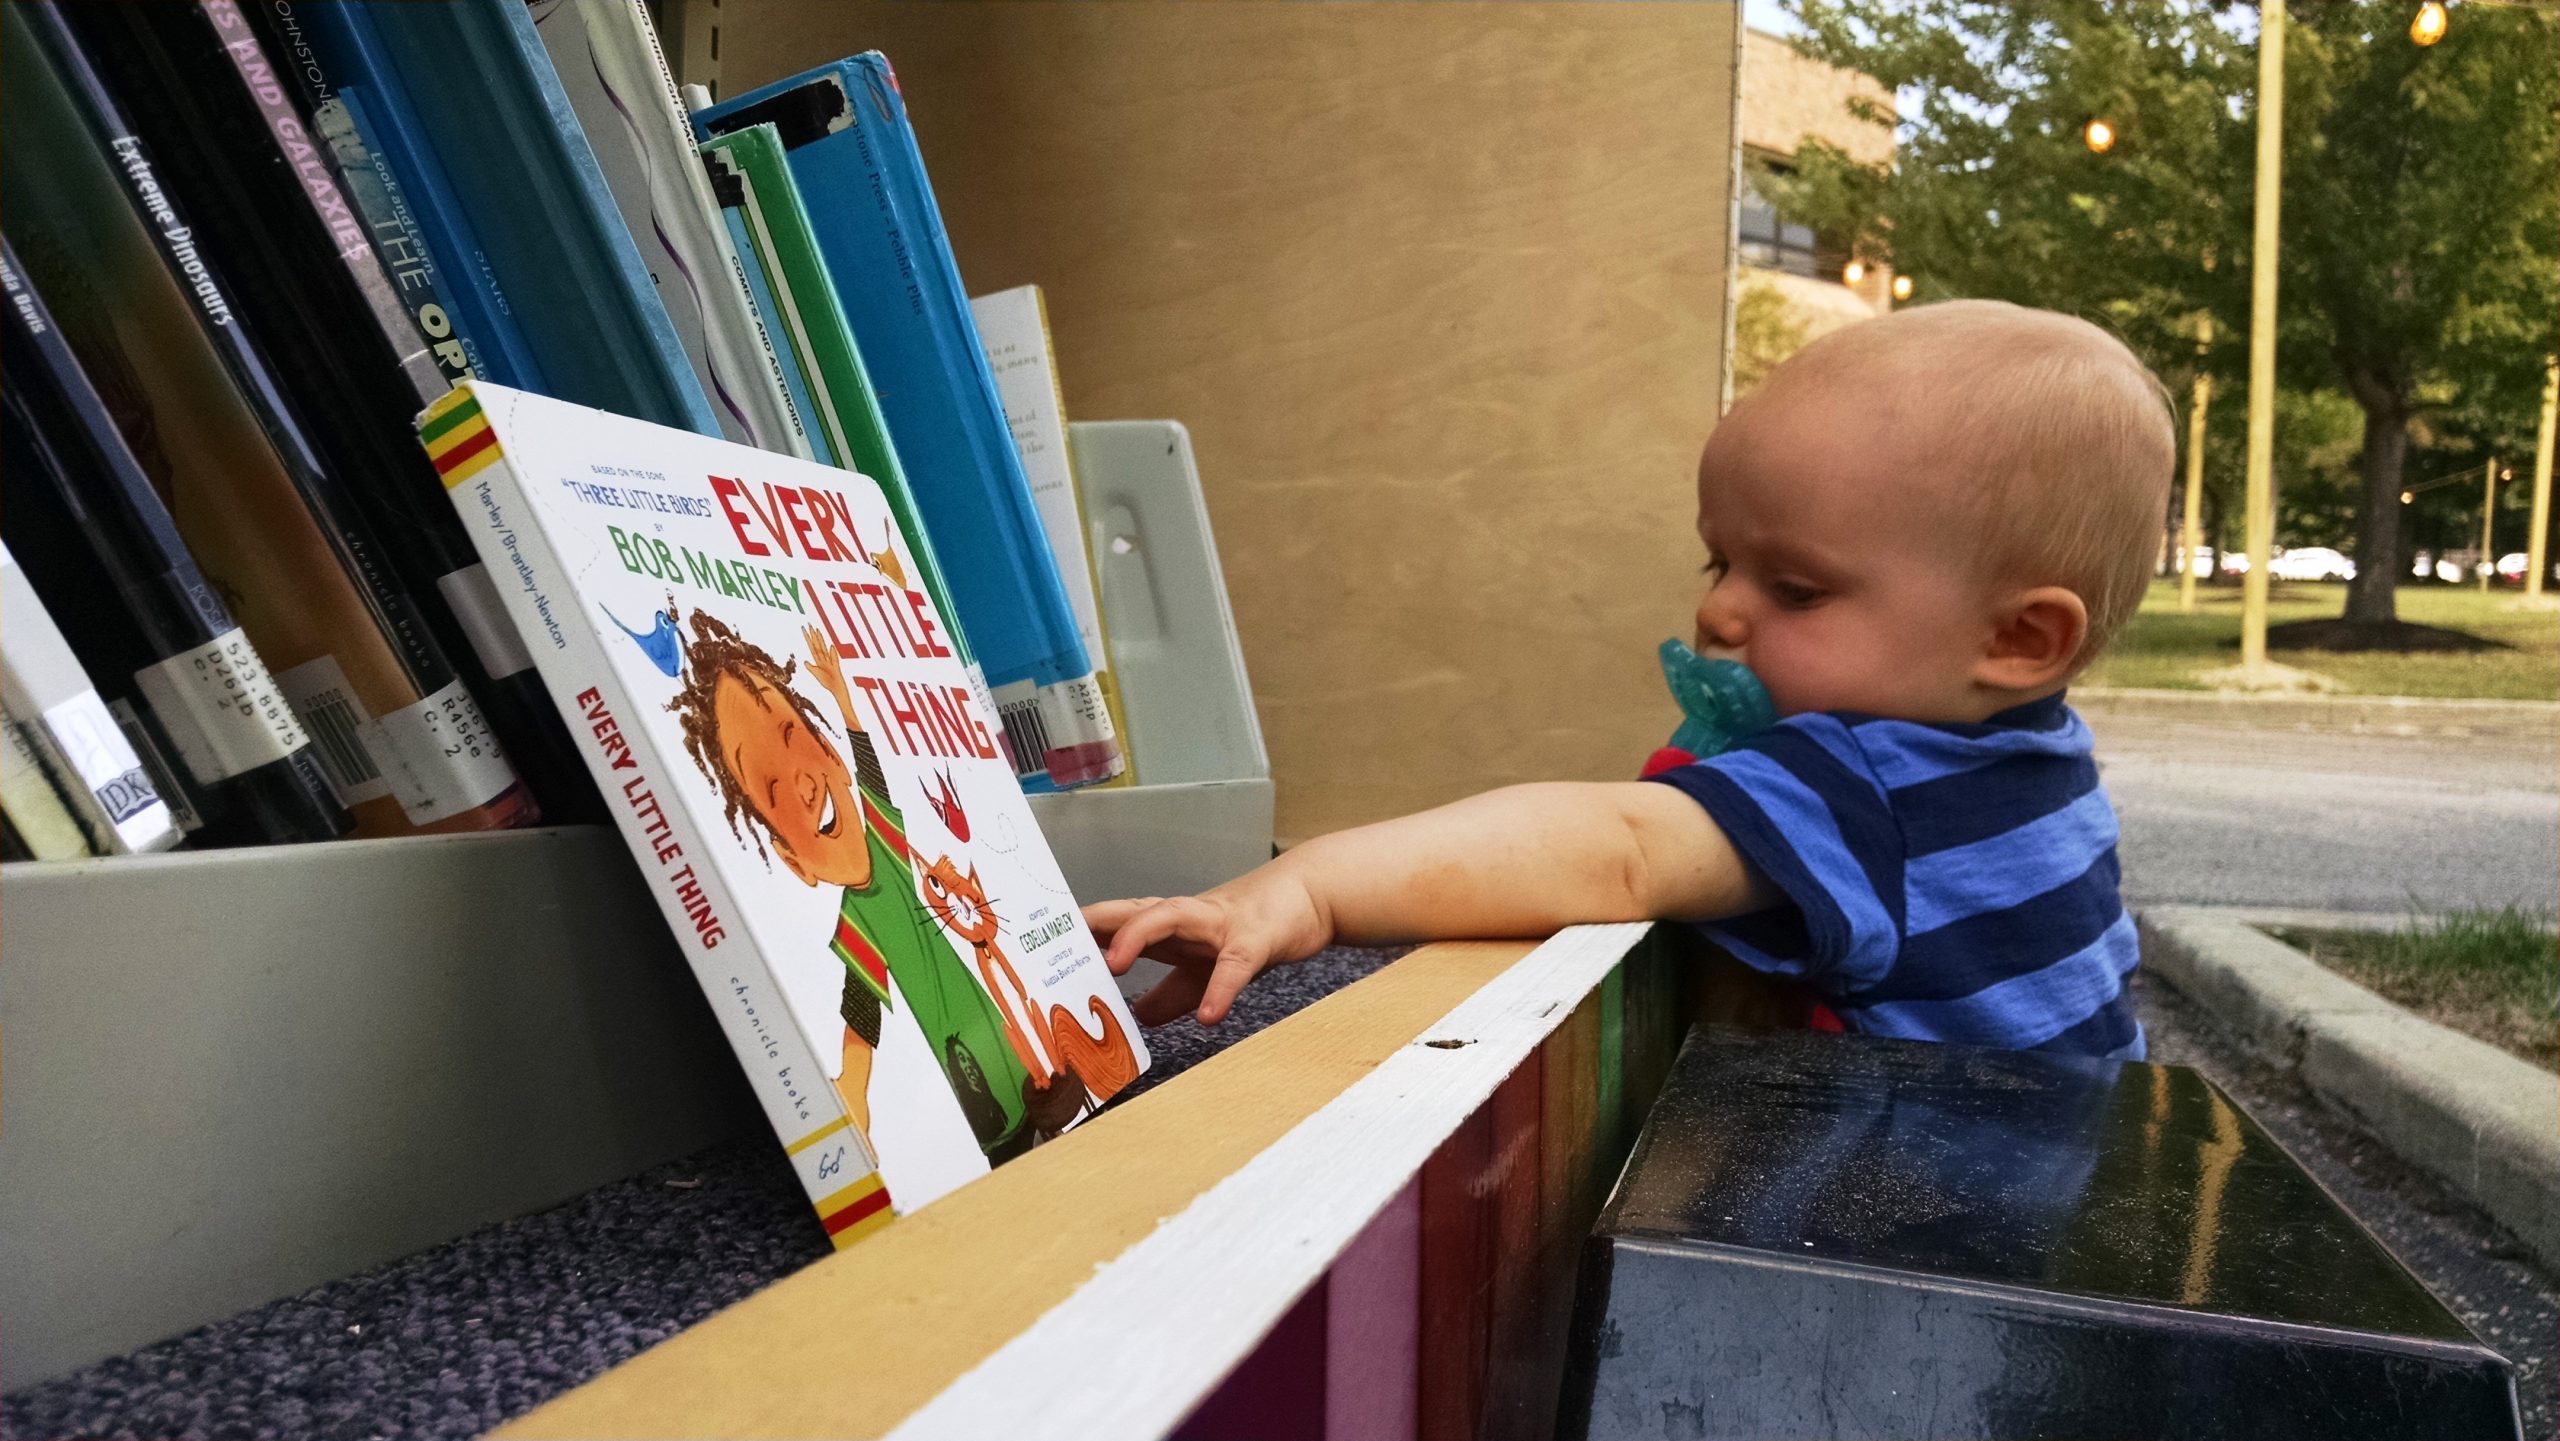 A toddler reaches for a book on the Pop-Up Library during the CityFest celebration in Mentor.